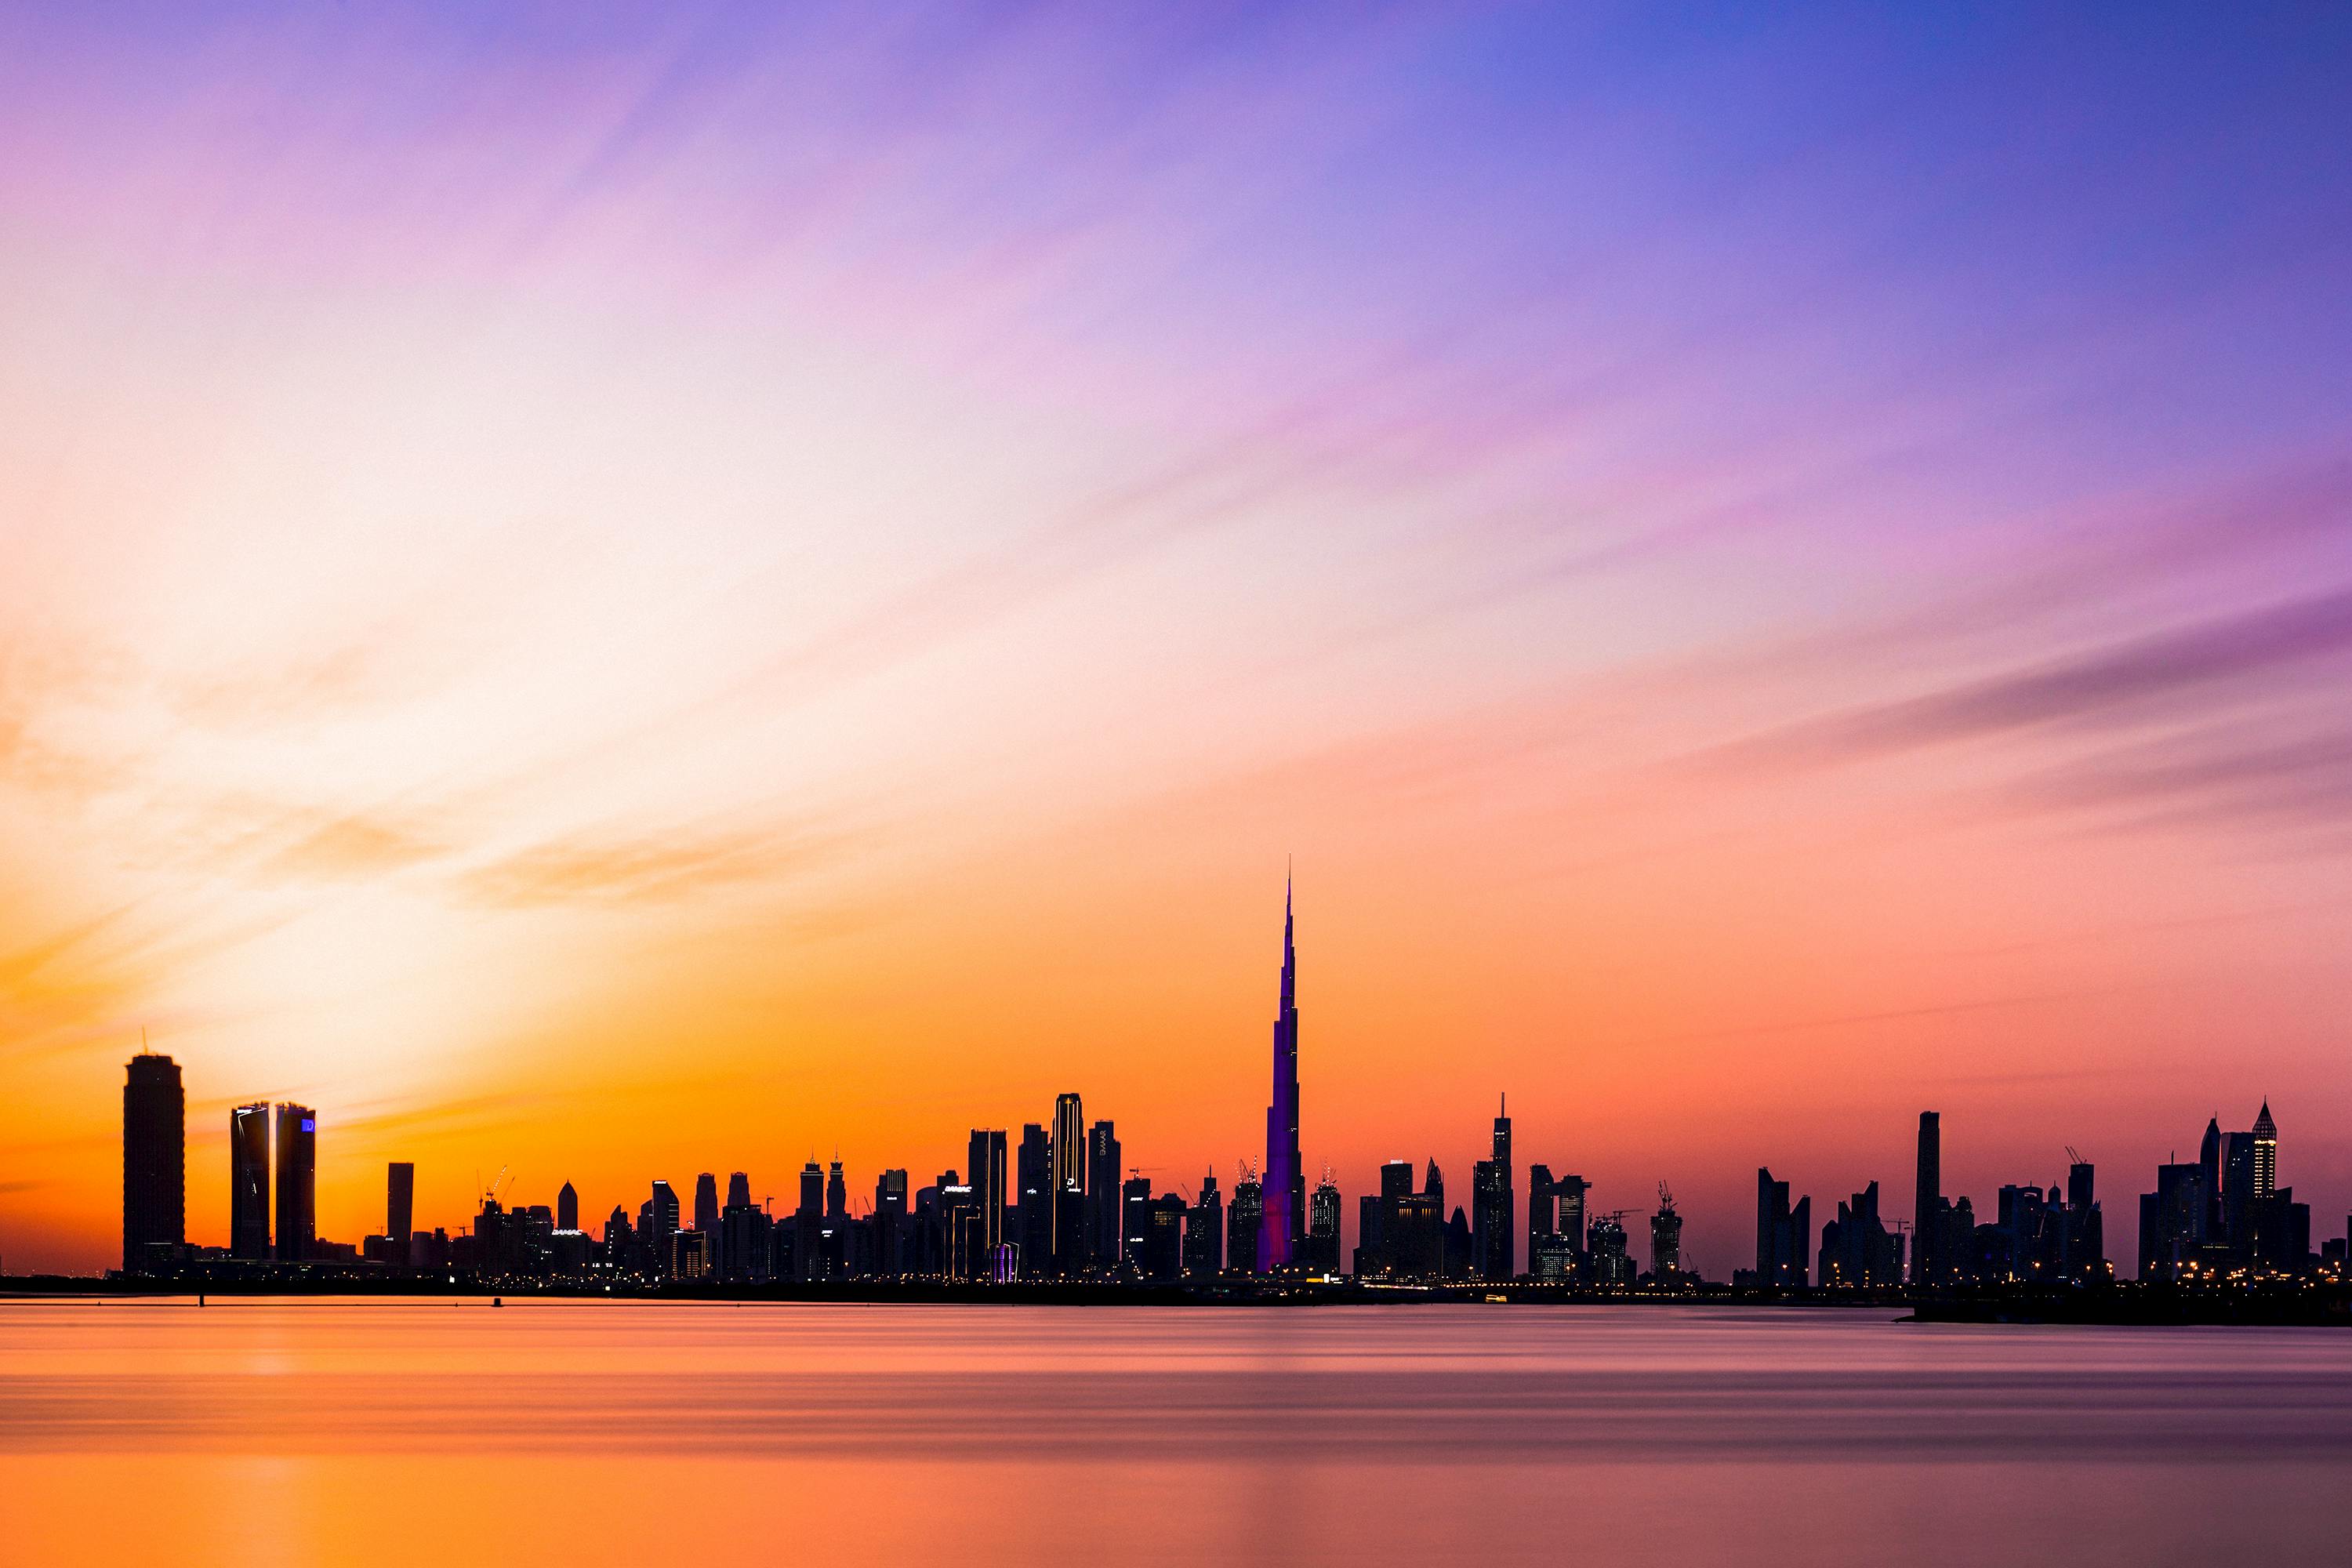 HD Dubai Wallpapers:Amazon.com:Appstore for Android